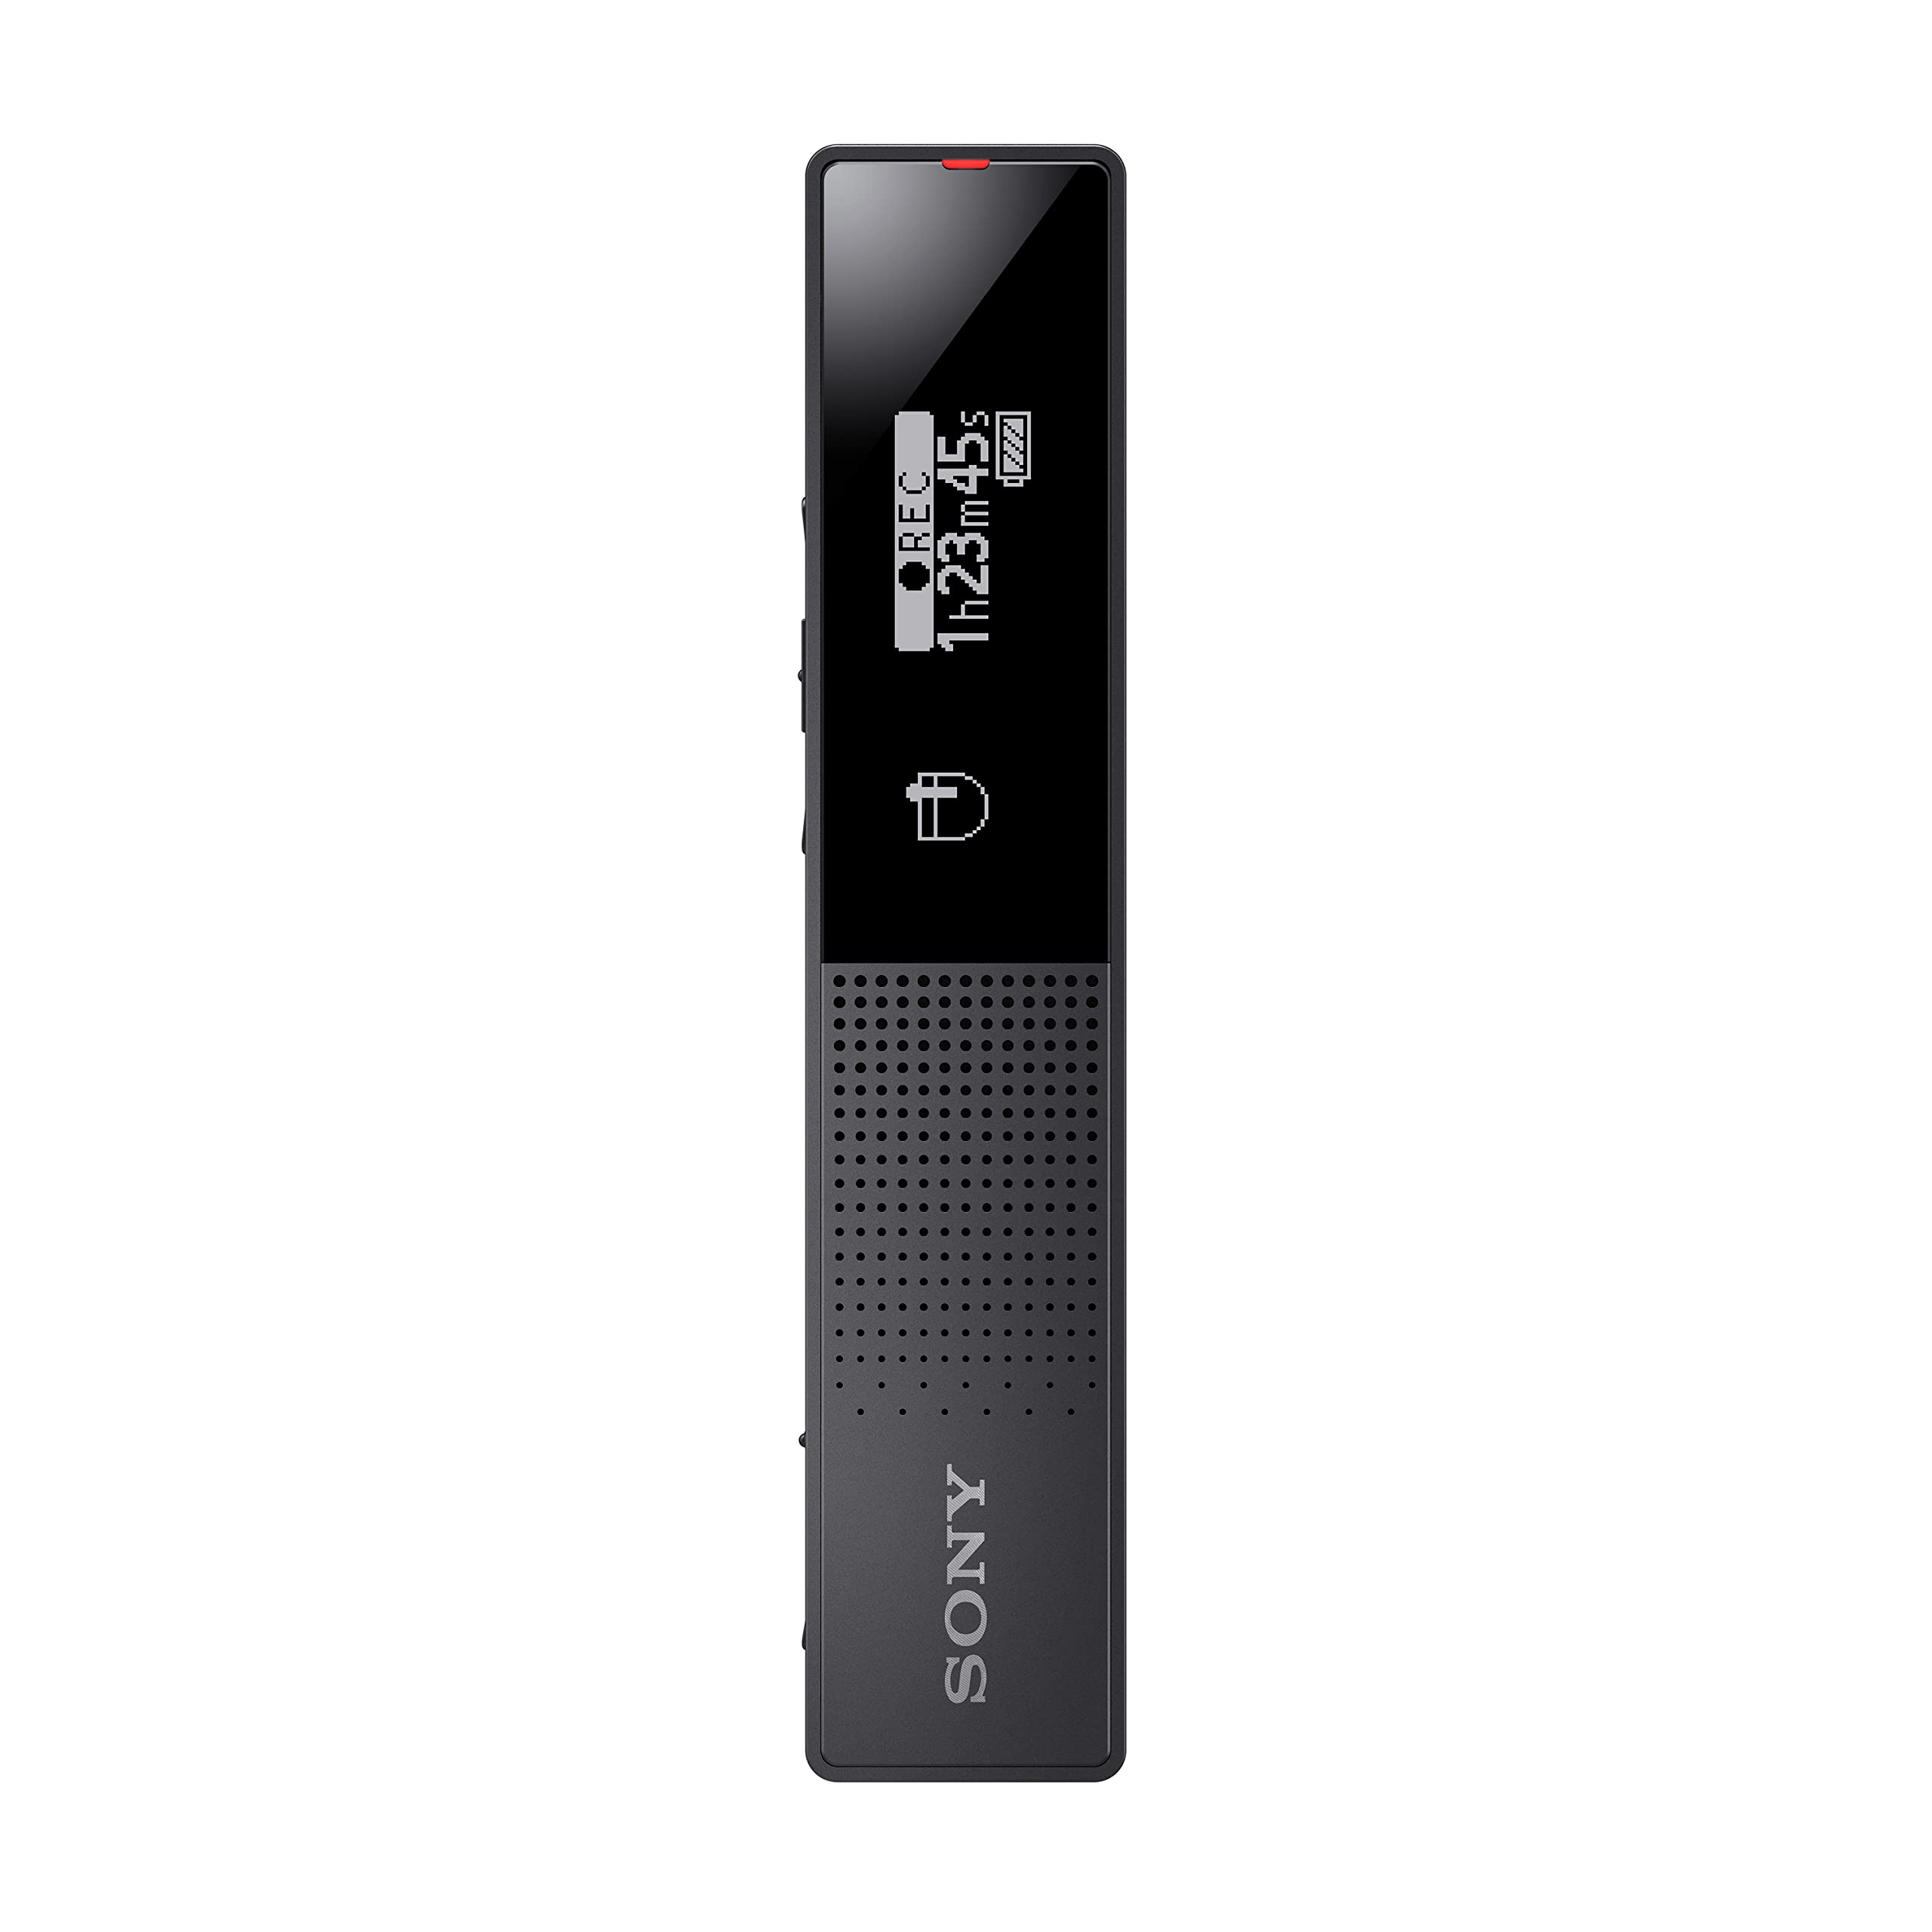 Sony ICD-TX660 - Slim Digital Voice Recorder with OLED ...